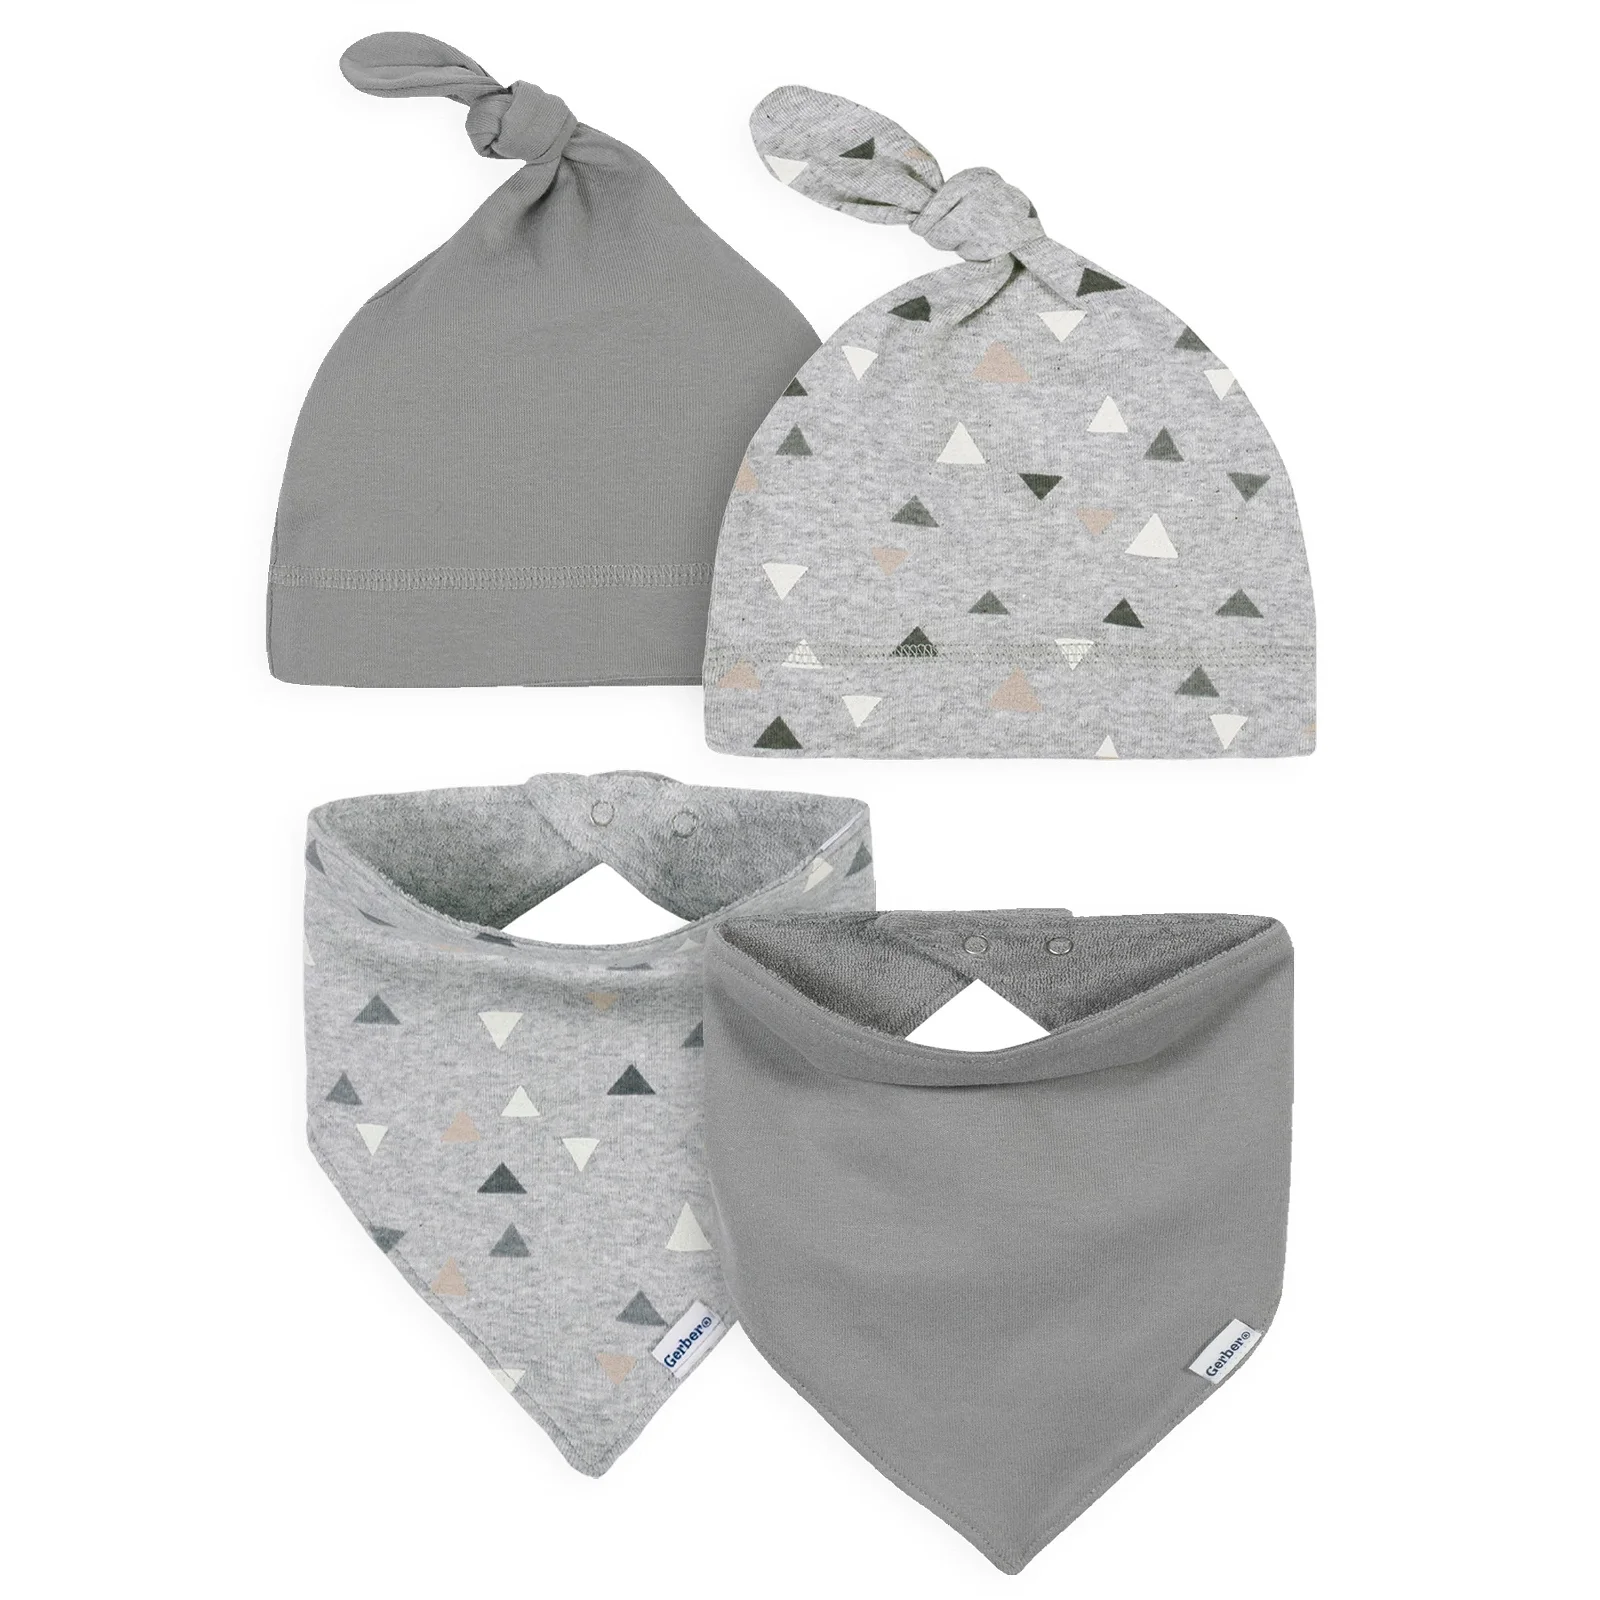 Image of 4-Piece Baby Boys Triangle Caps and Bibs Set